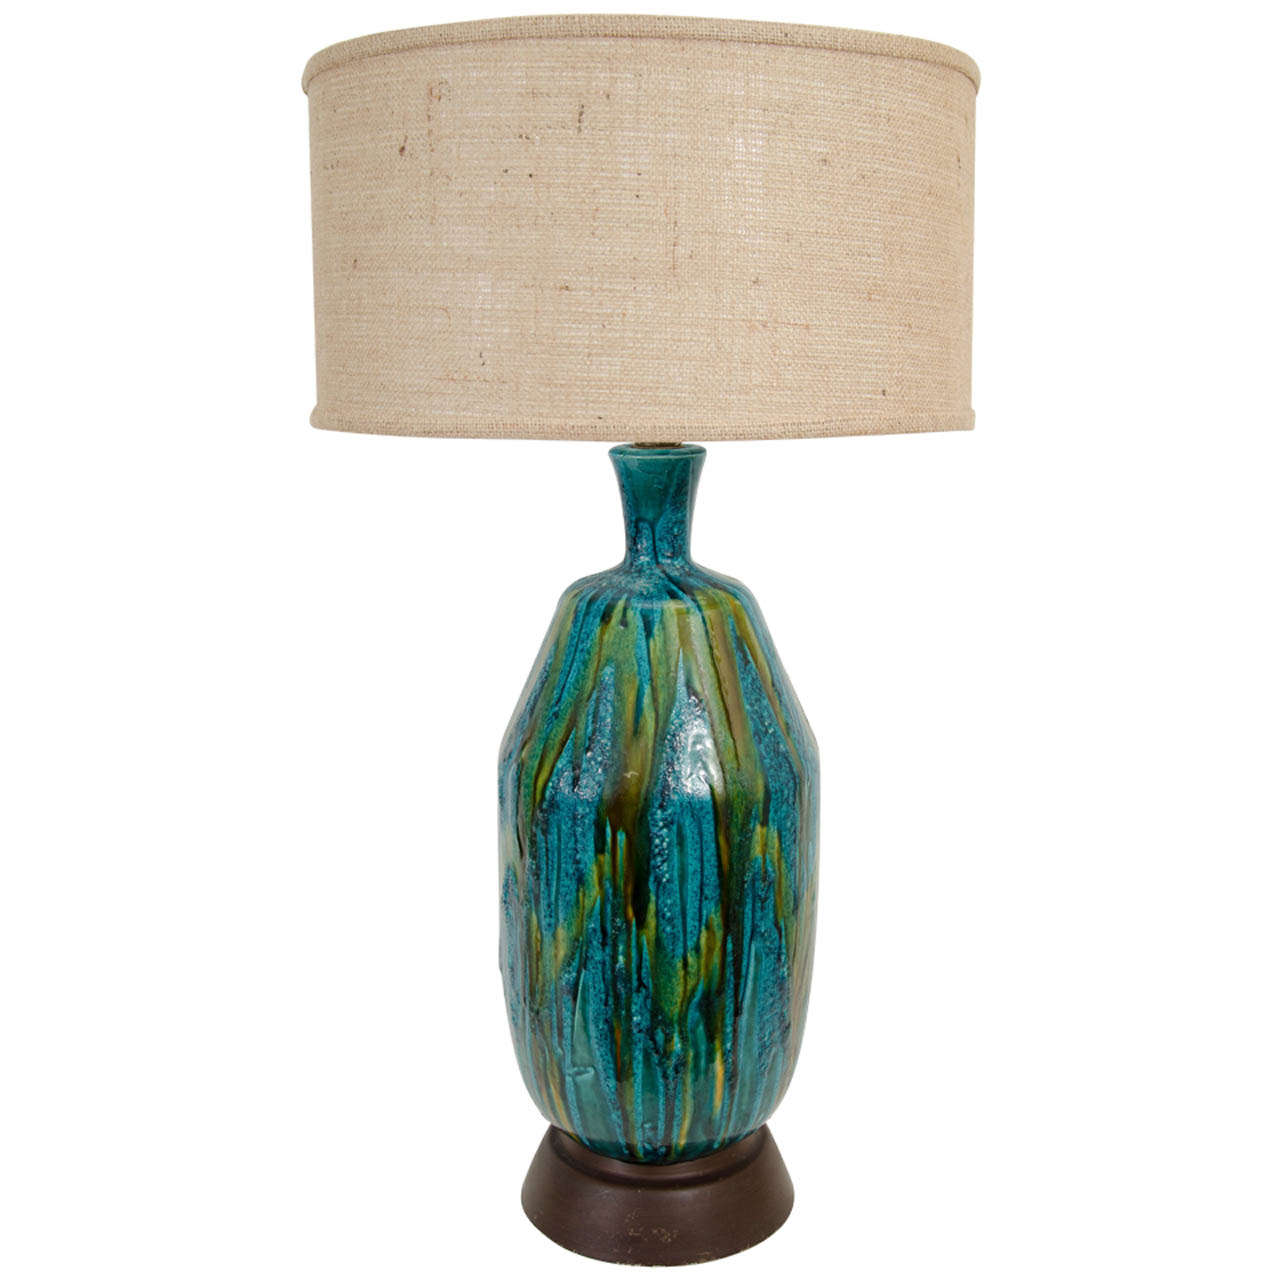 A Mid Century Ceramic Table Lamp in Green and Blue Glaze